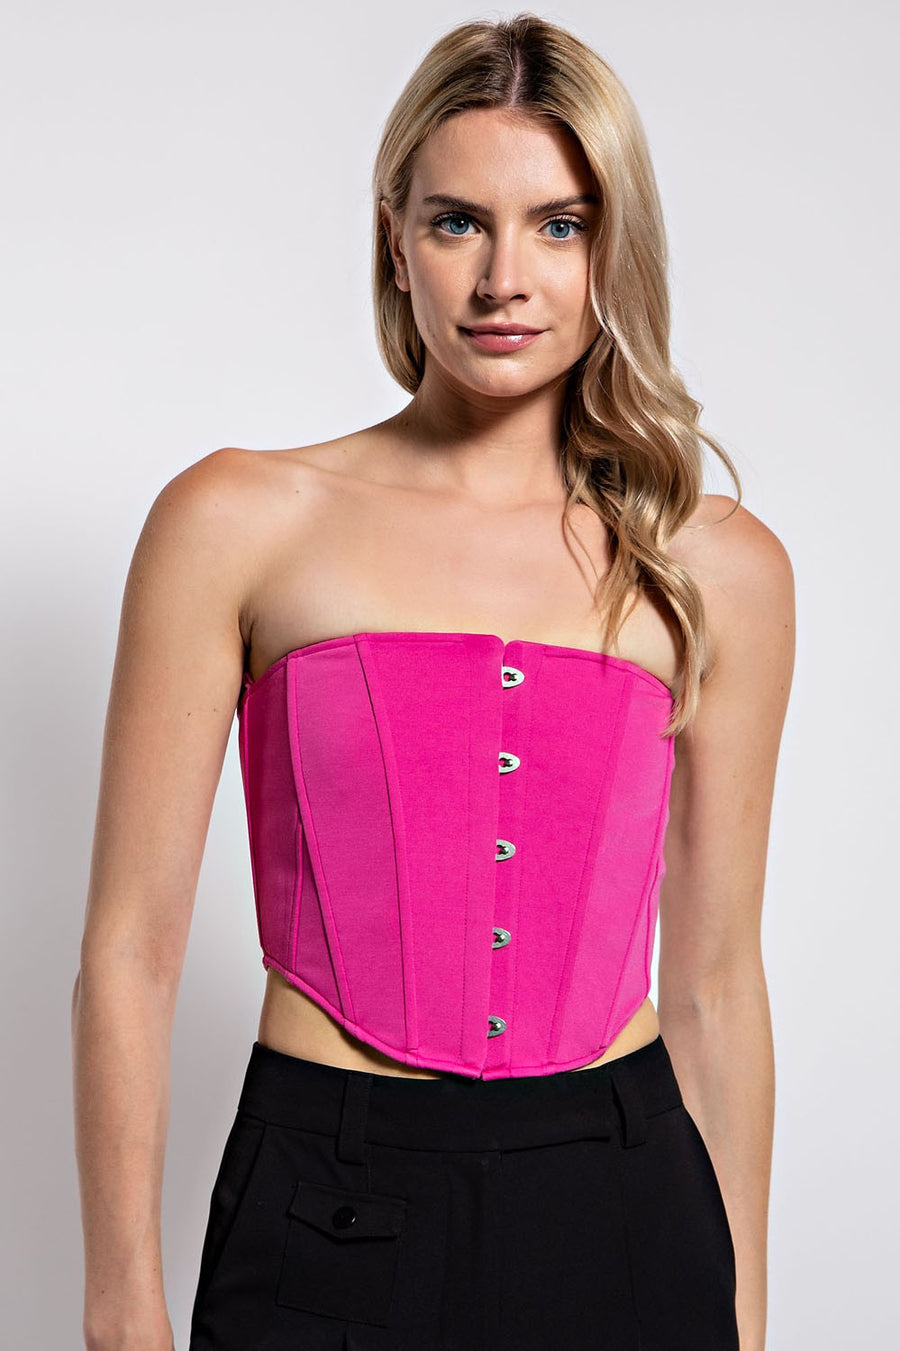 strapless corset top in the color hot pink.